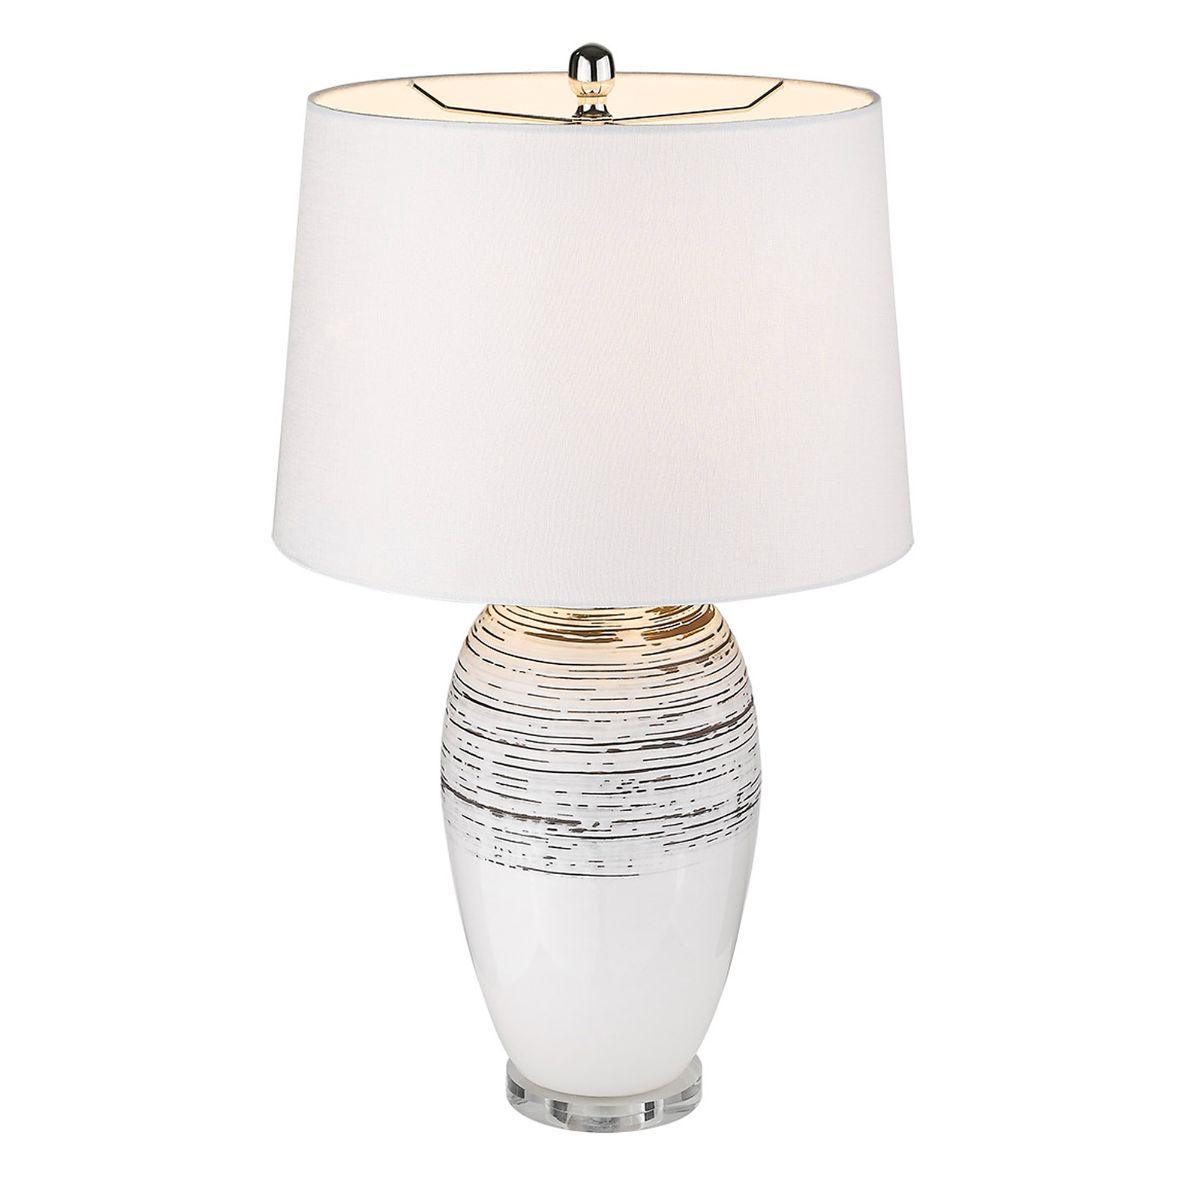 Trend Home 1 Light 27 inches Table Lamp Ceramic Body and Polished Nickel Accents